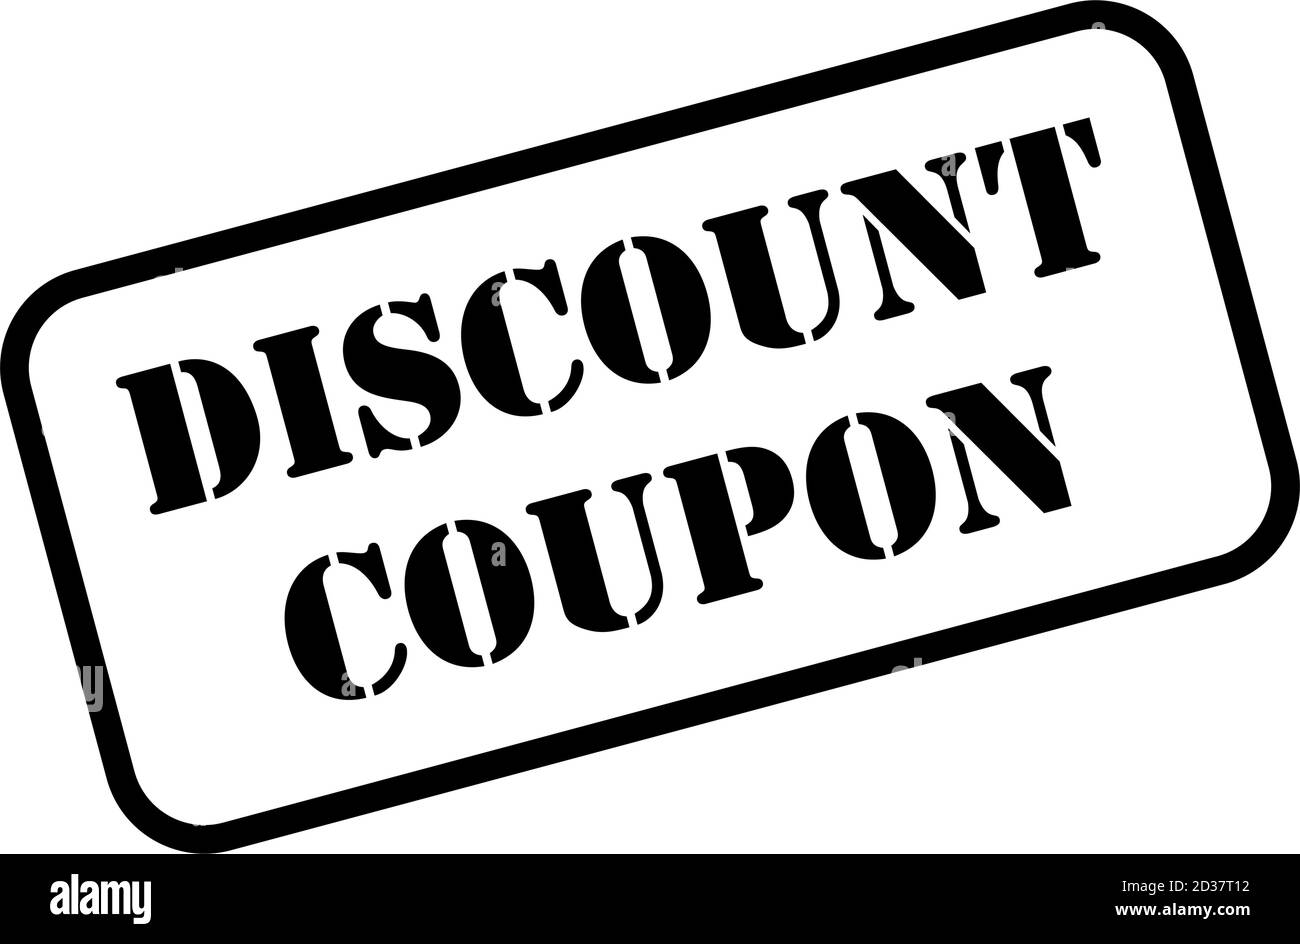 Discount stamps Black and White Stock Photos & Images - Alamy